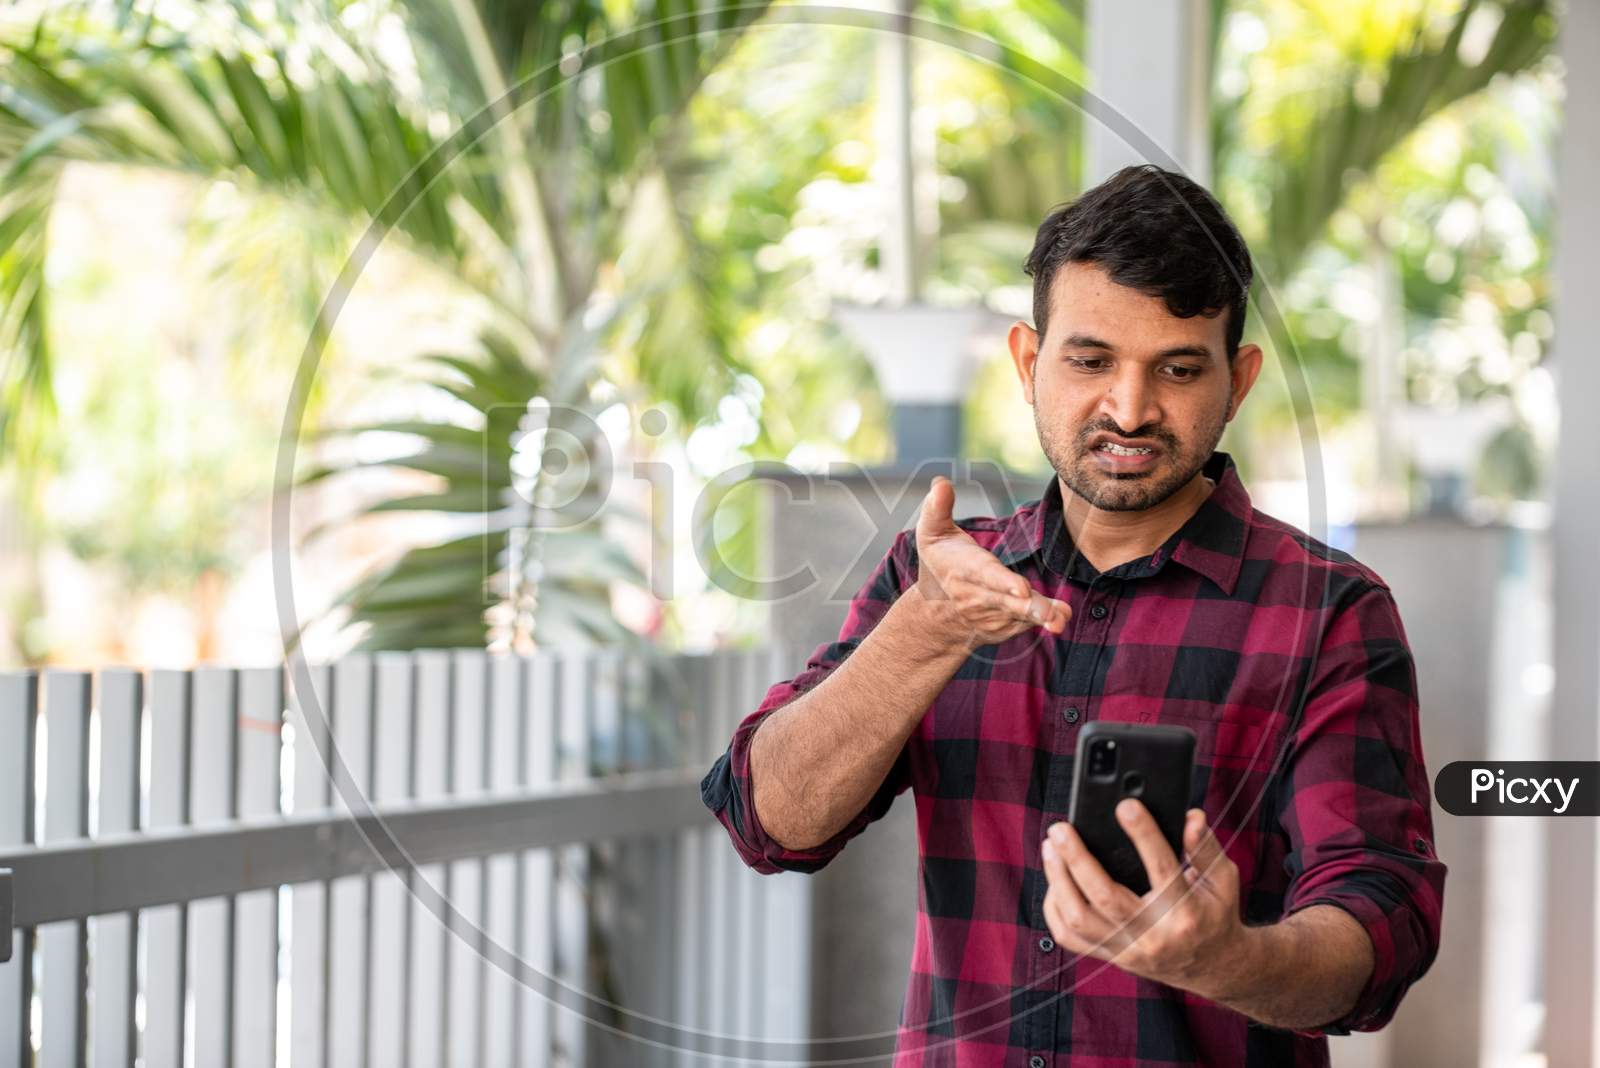 Portrait of a Young Indian Man makes gestures while talking on a video call.